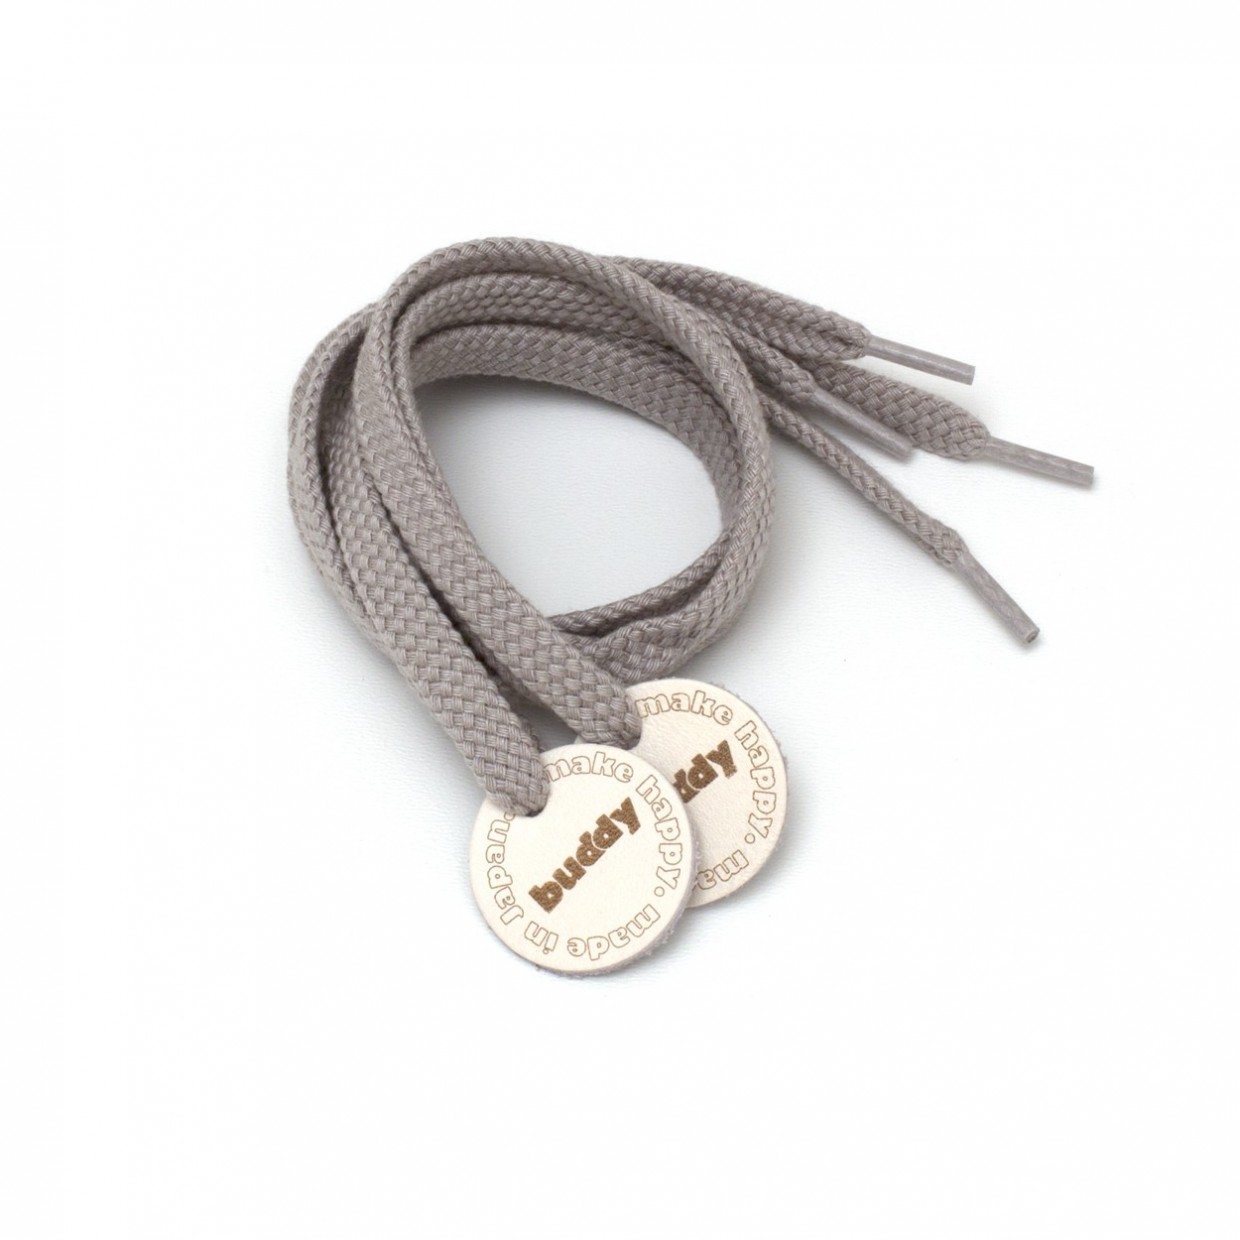 Shoelaces Grey with Leather patch 78 cm : 31 "